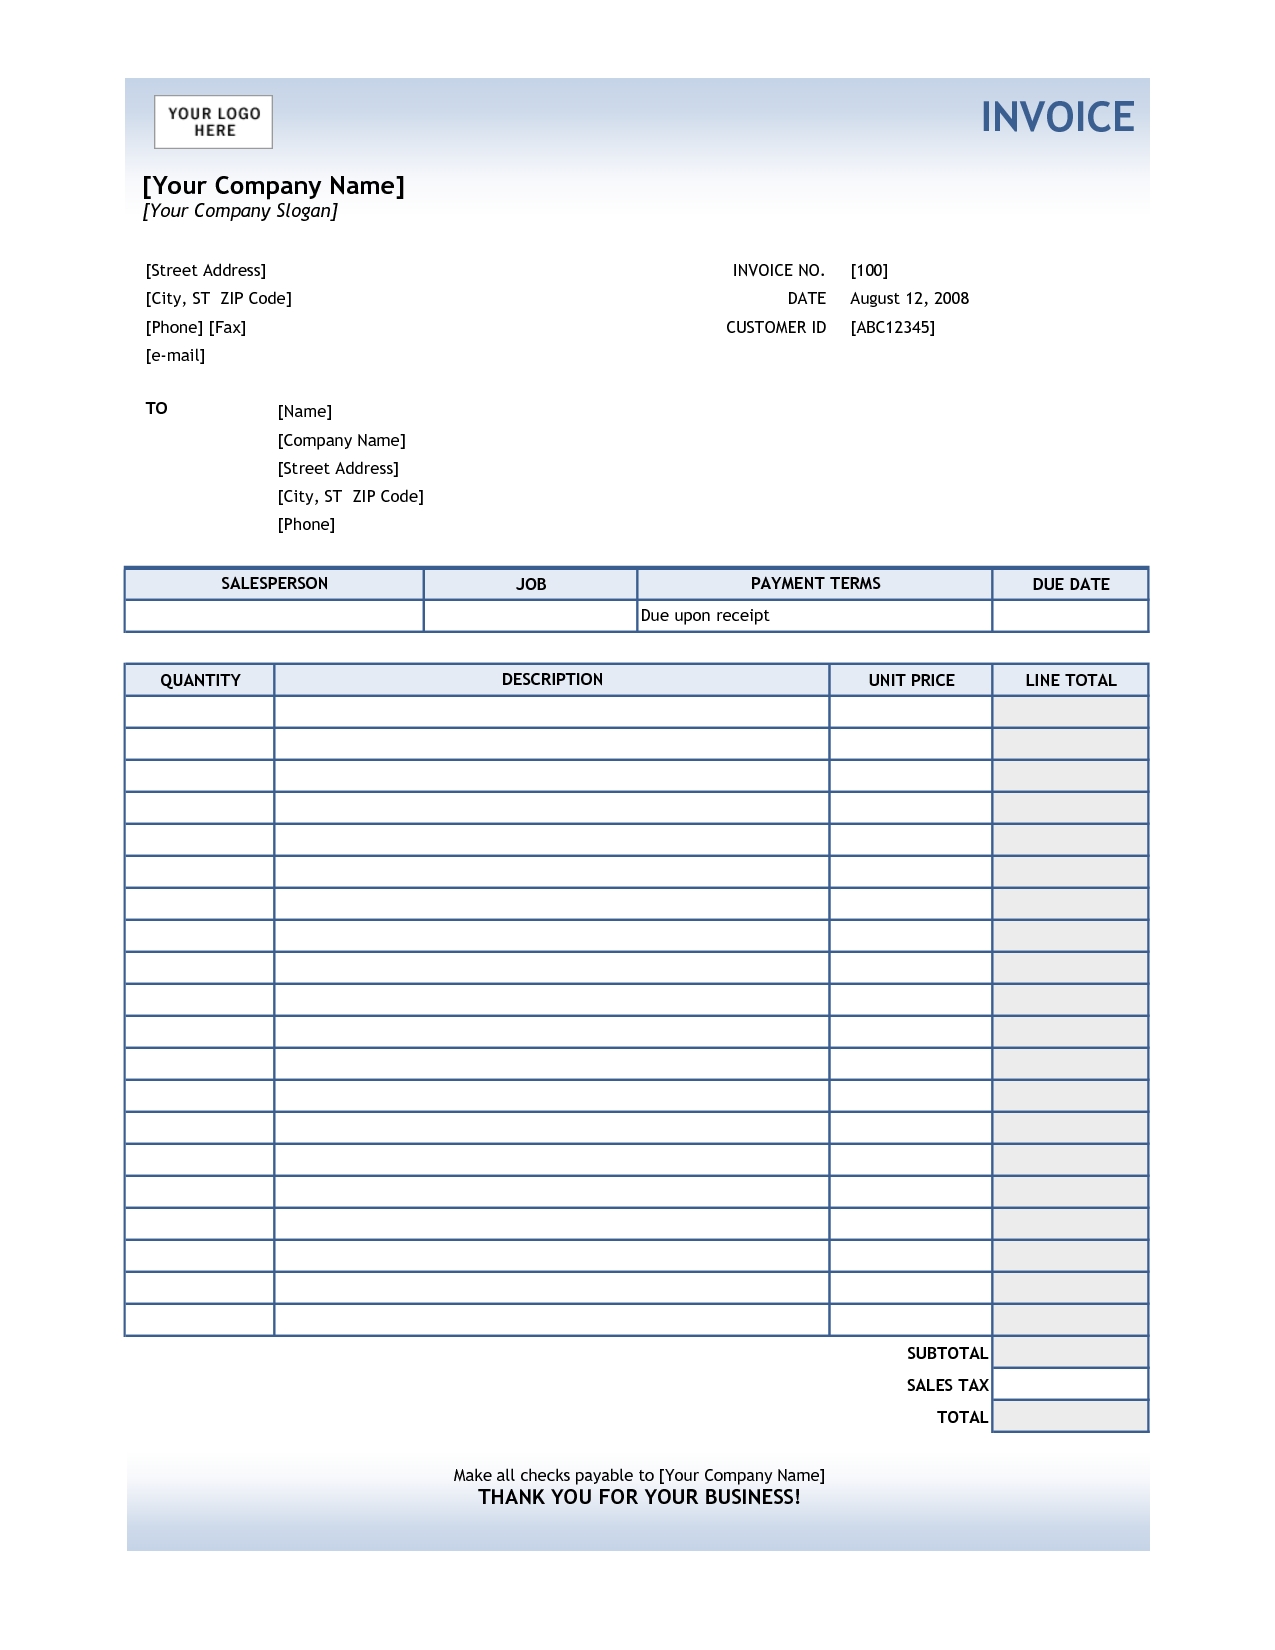 best photos of invoice format in excel excel service invoice invoice in excel